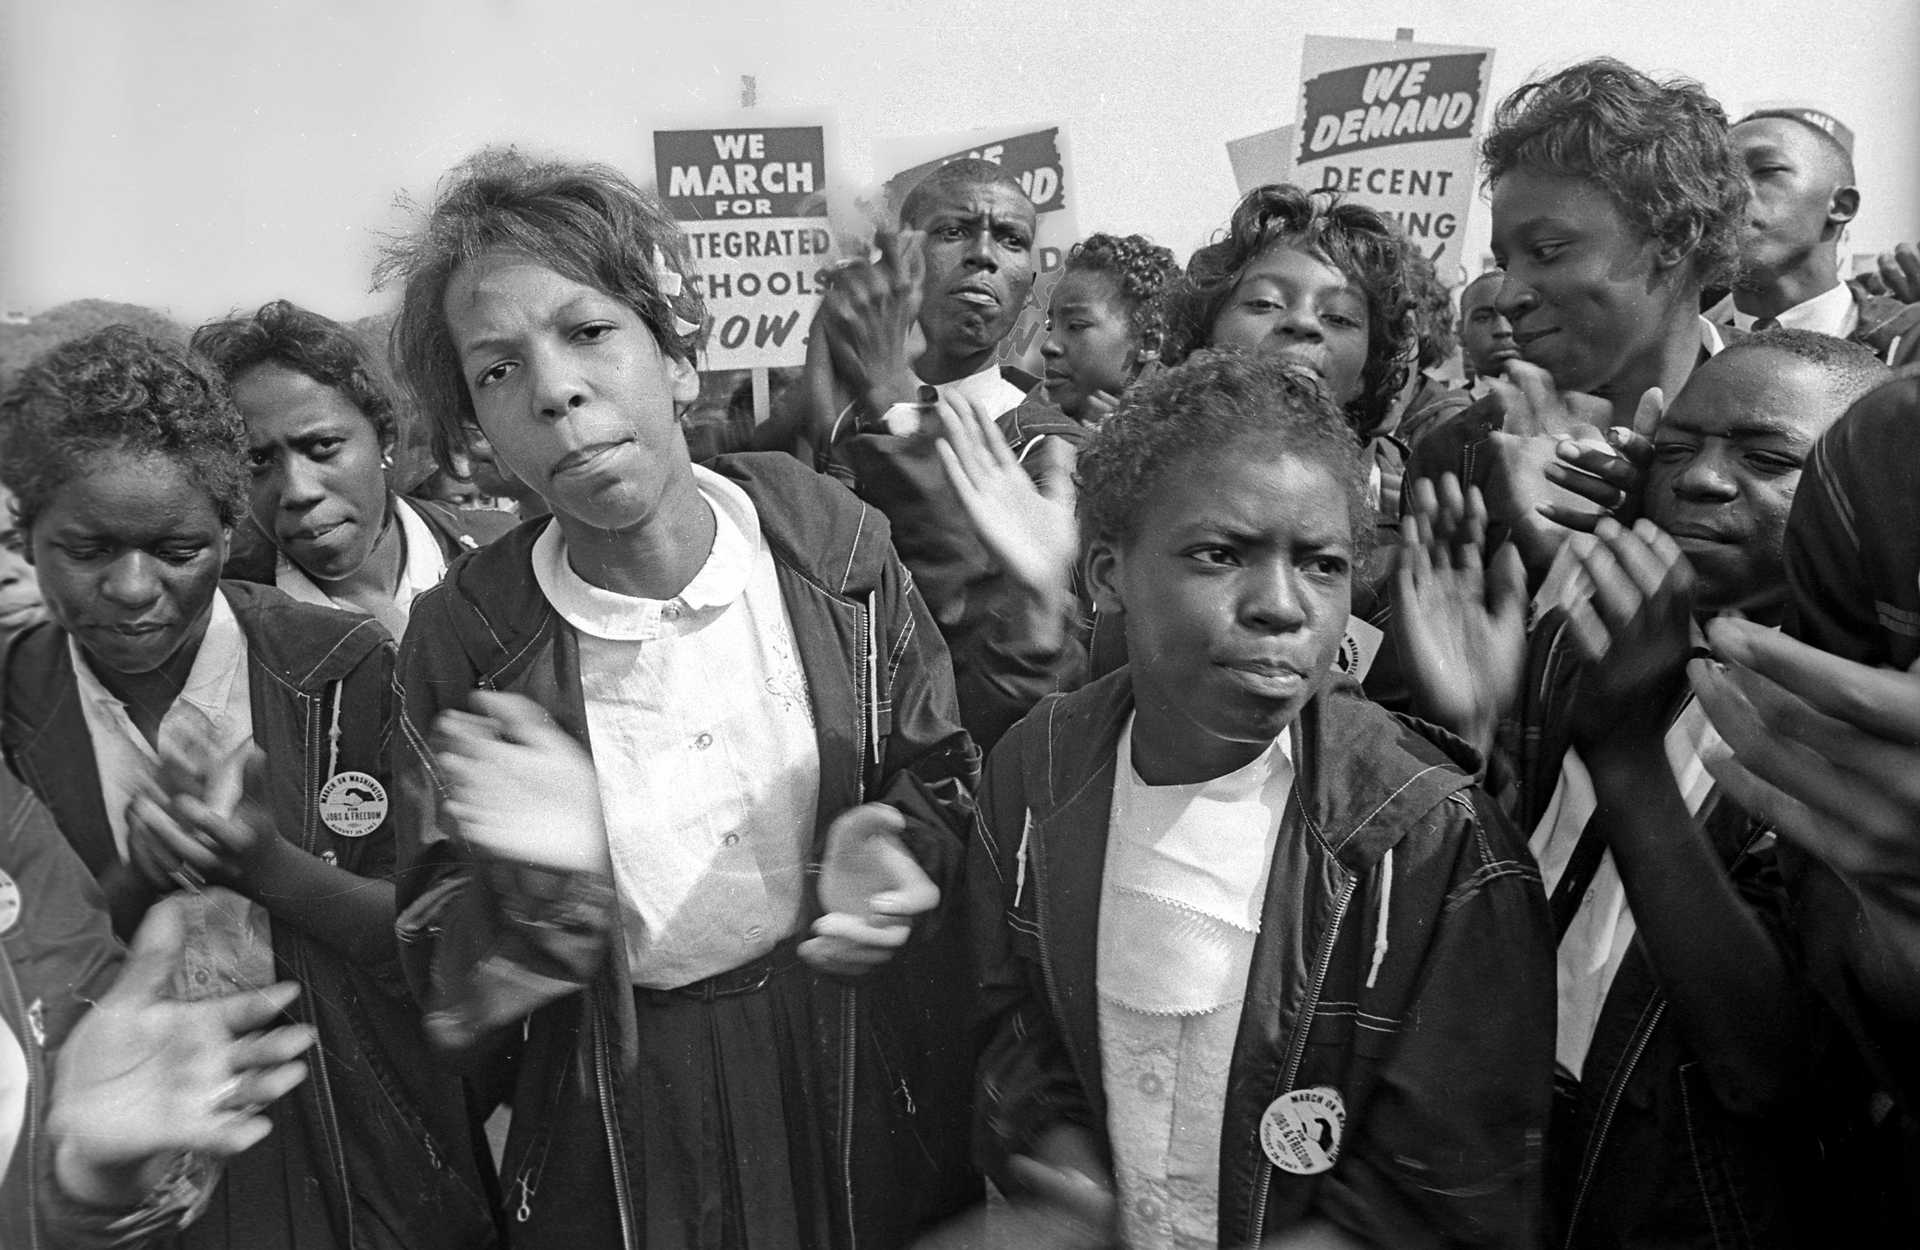 A digital image of The March on Washington for Jobs and Freedom, which took place in Washington, DC on August 28, 1963. The image depicts a close-up of a crowd of young women dressed in school-like uniforms clapping their hands.